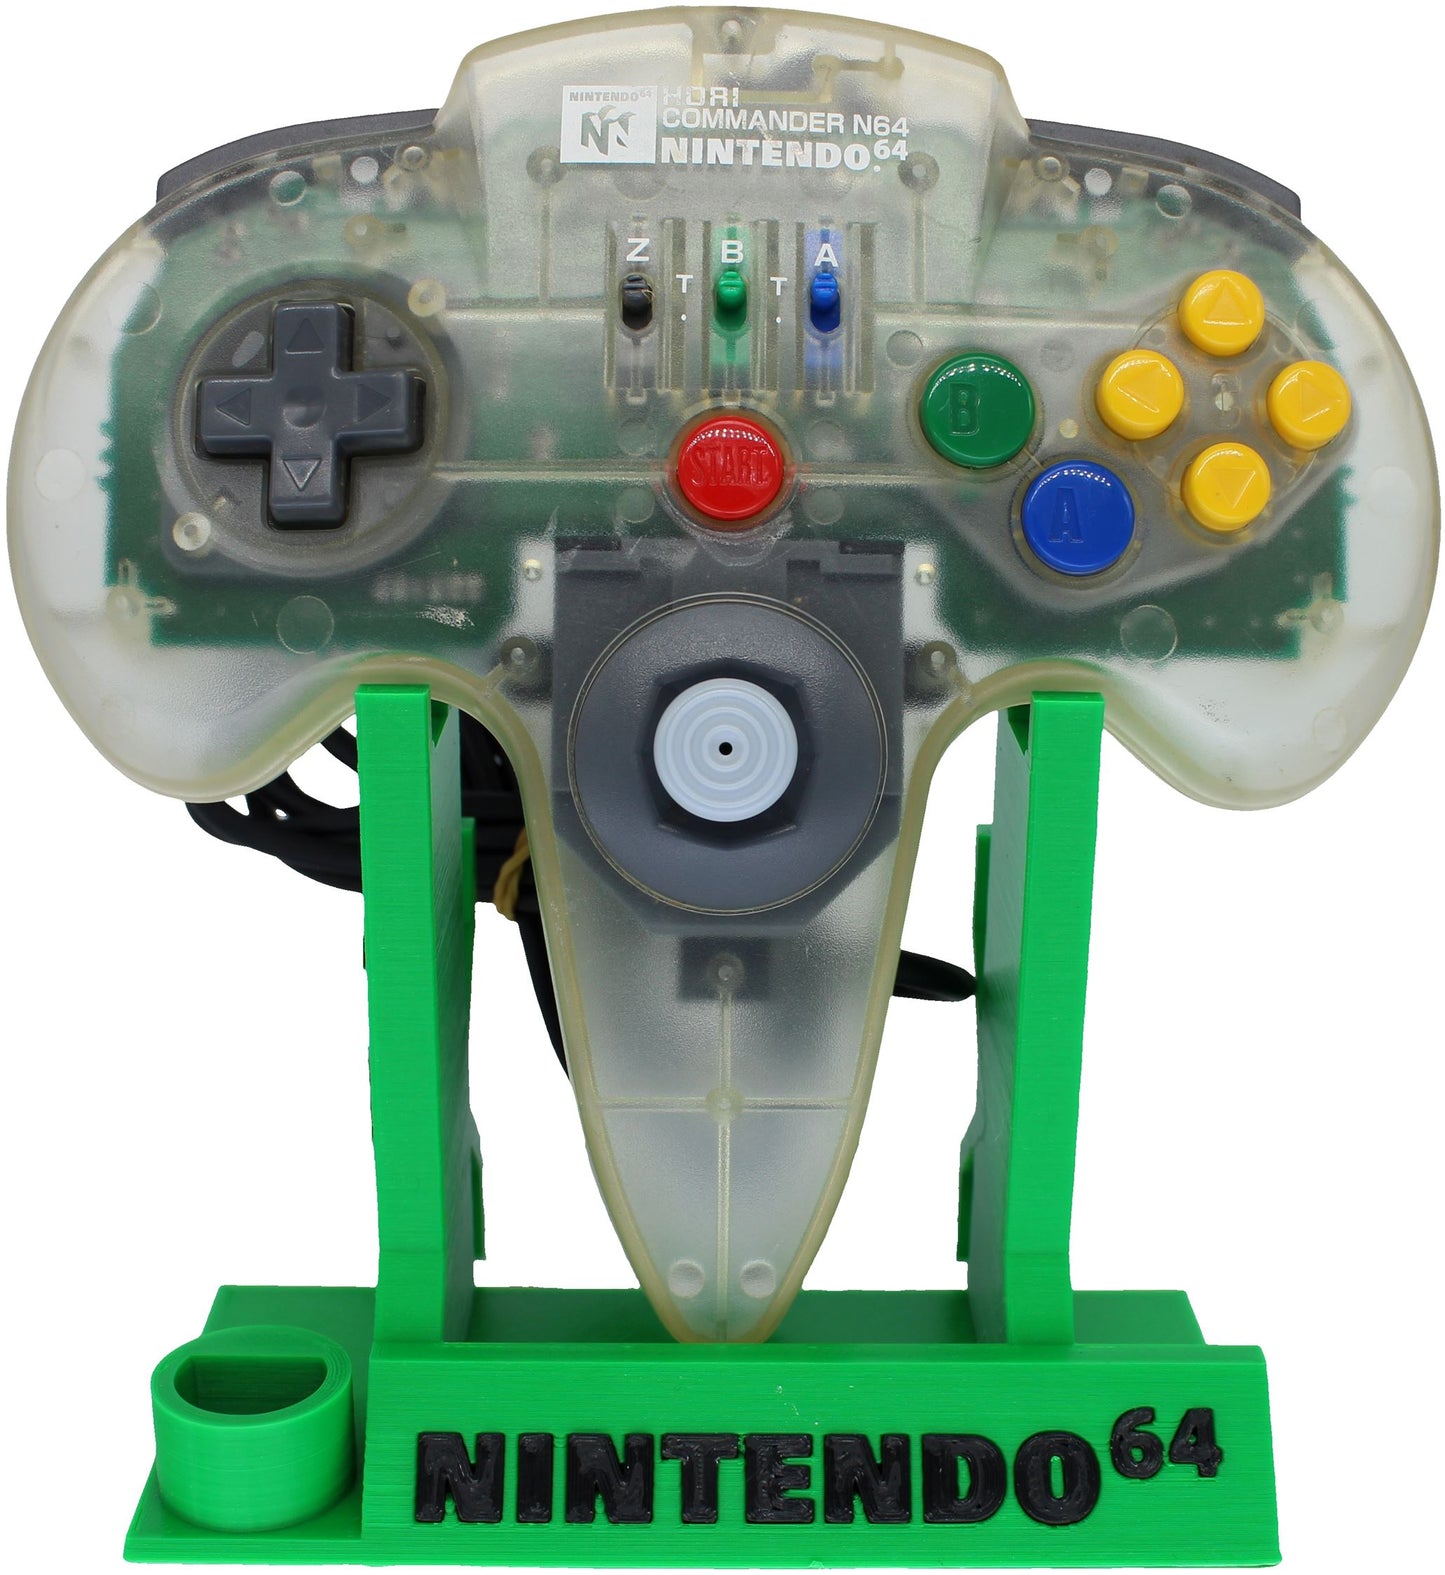 Commander N64 Controller by Hori